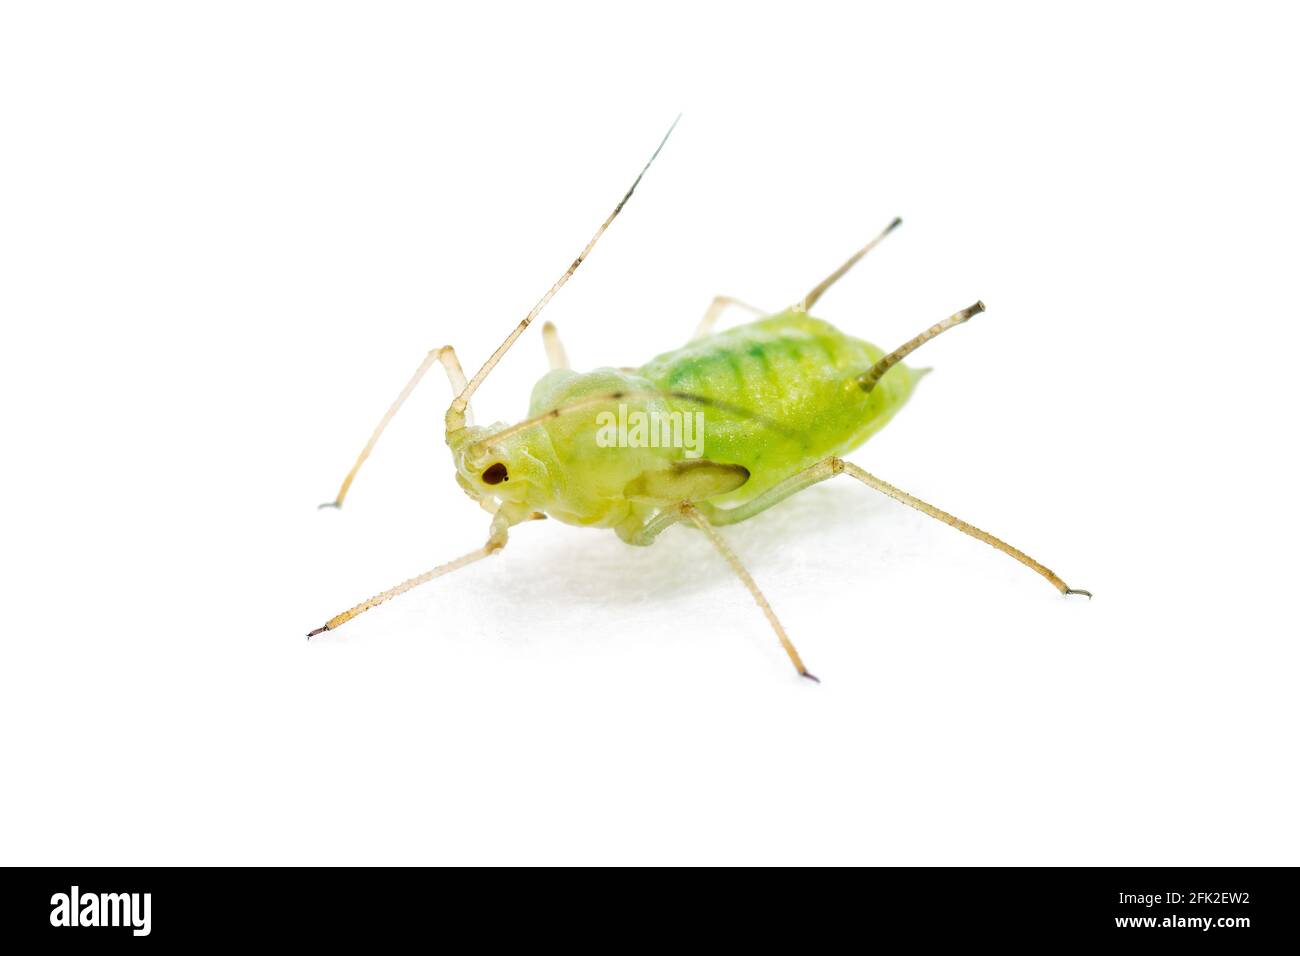 Green Fly or Aphid Parasite Pest Insect Isolated on White Background Stock Photo